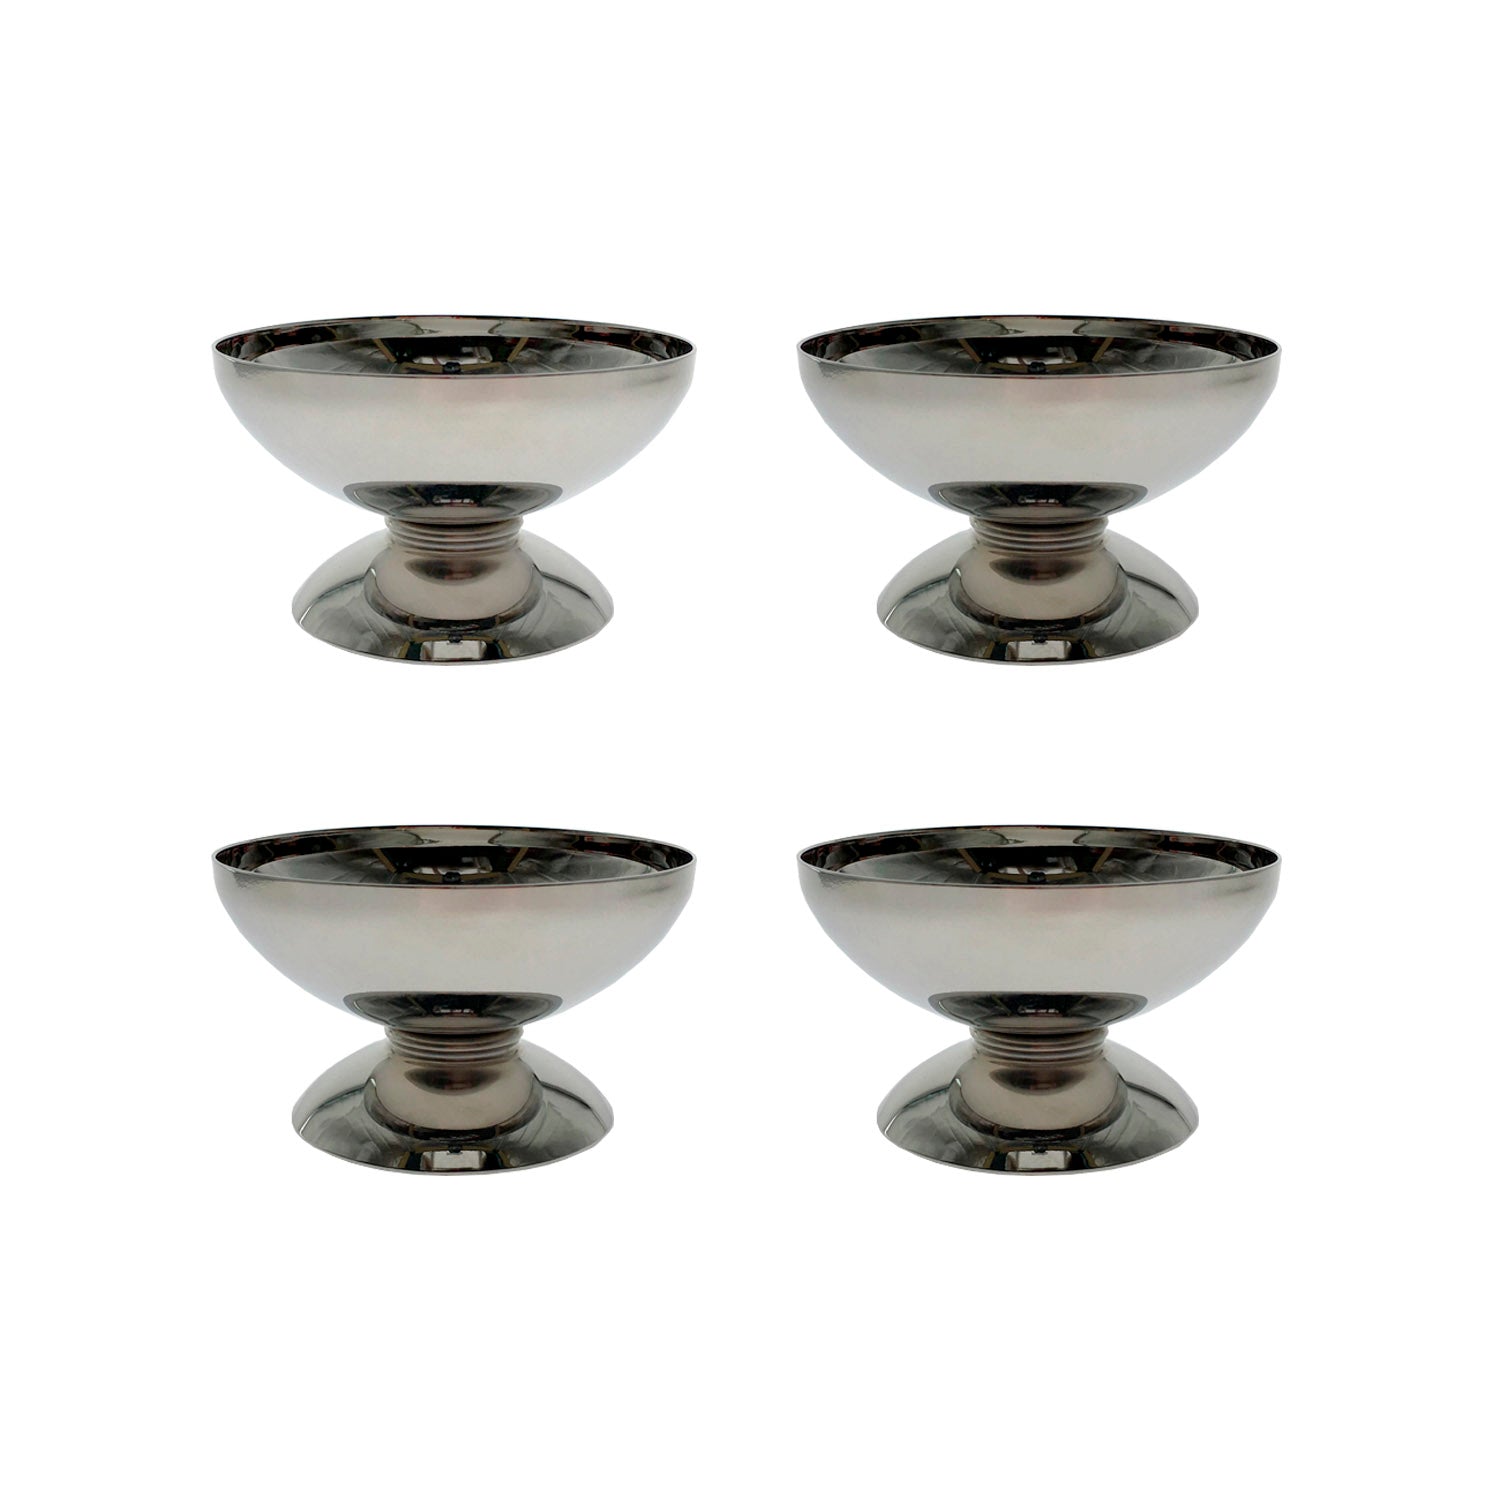 4 STAINLESS STEEL ICE CREAM BOWLS